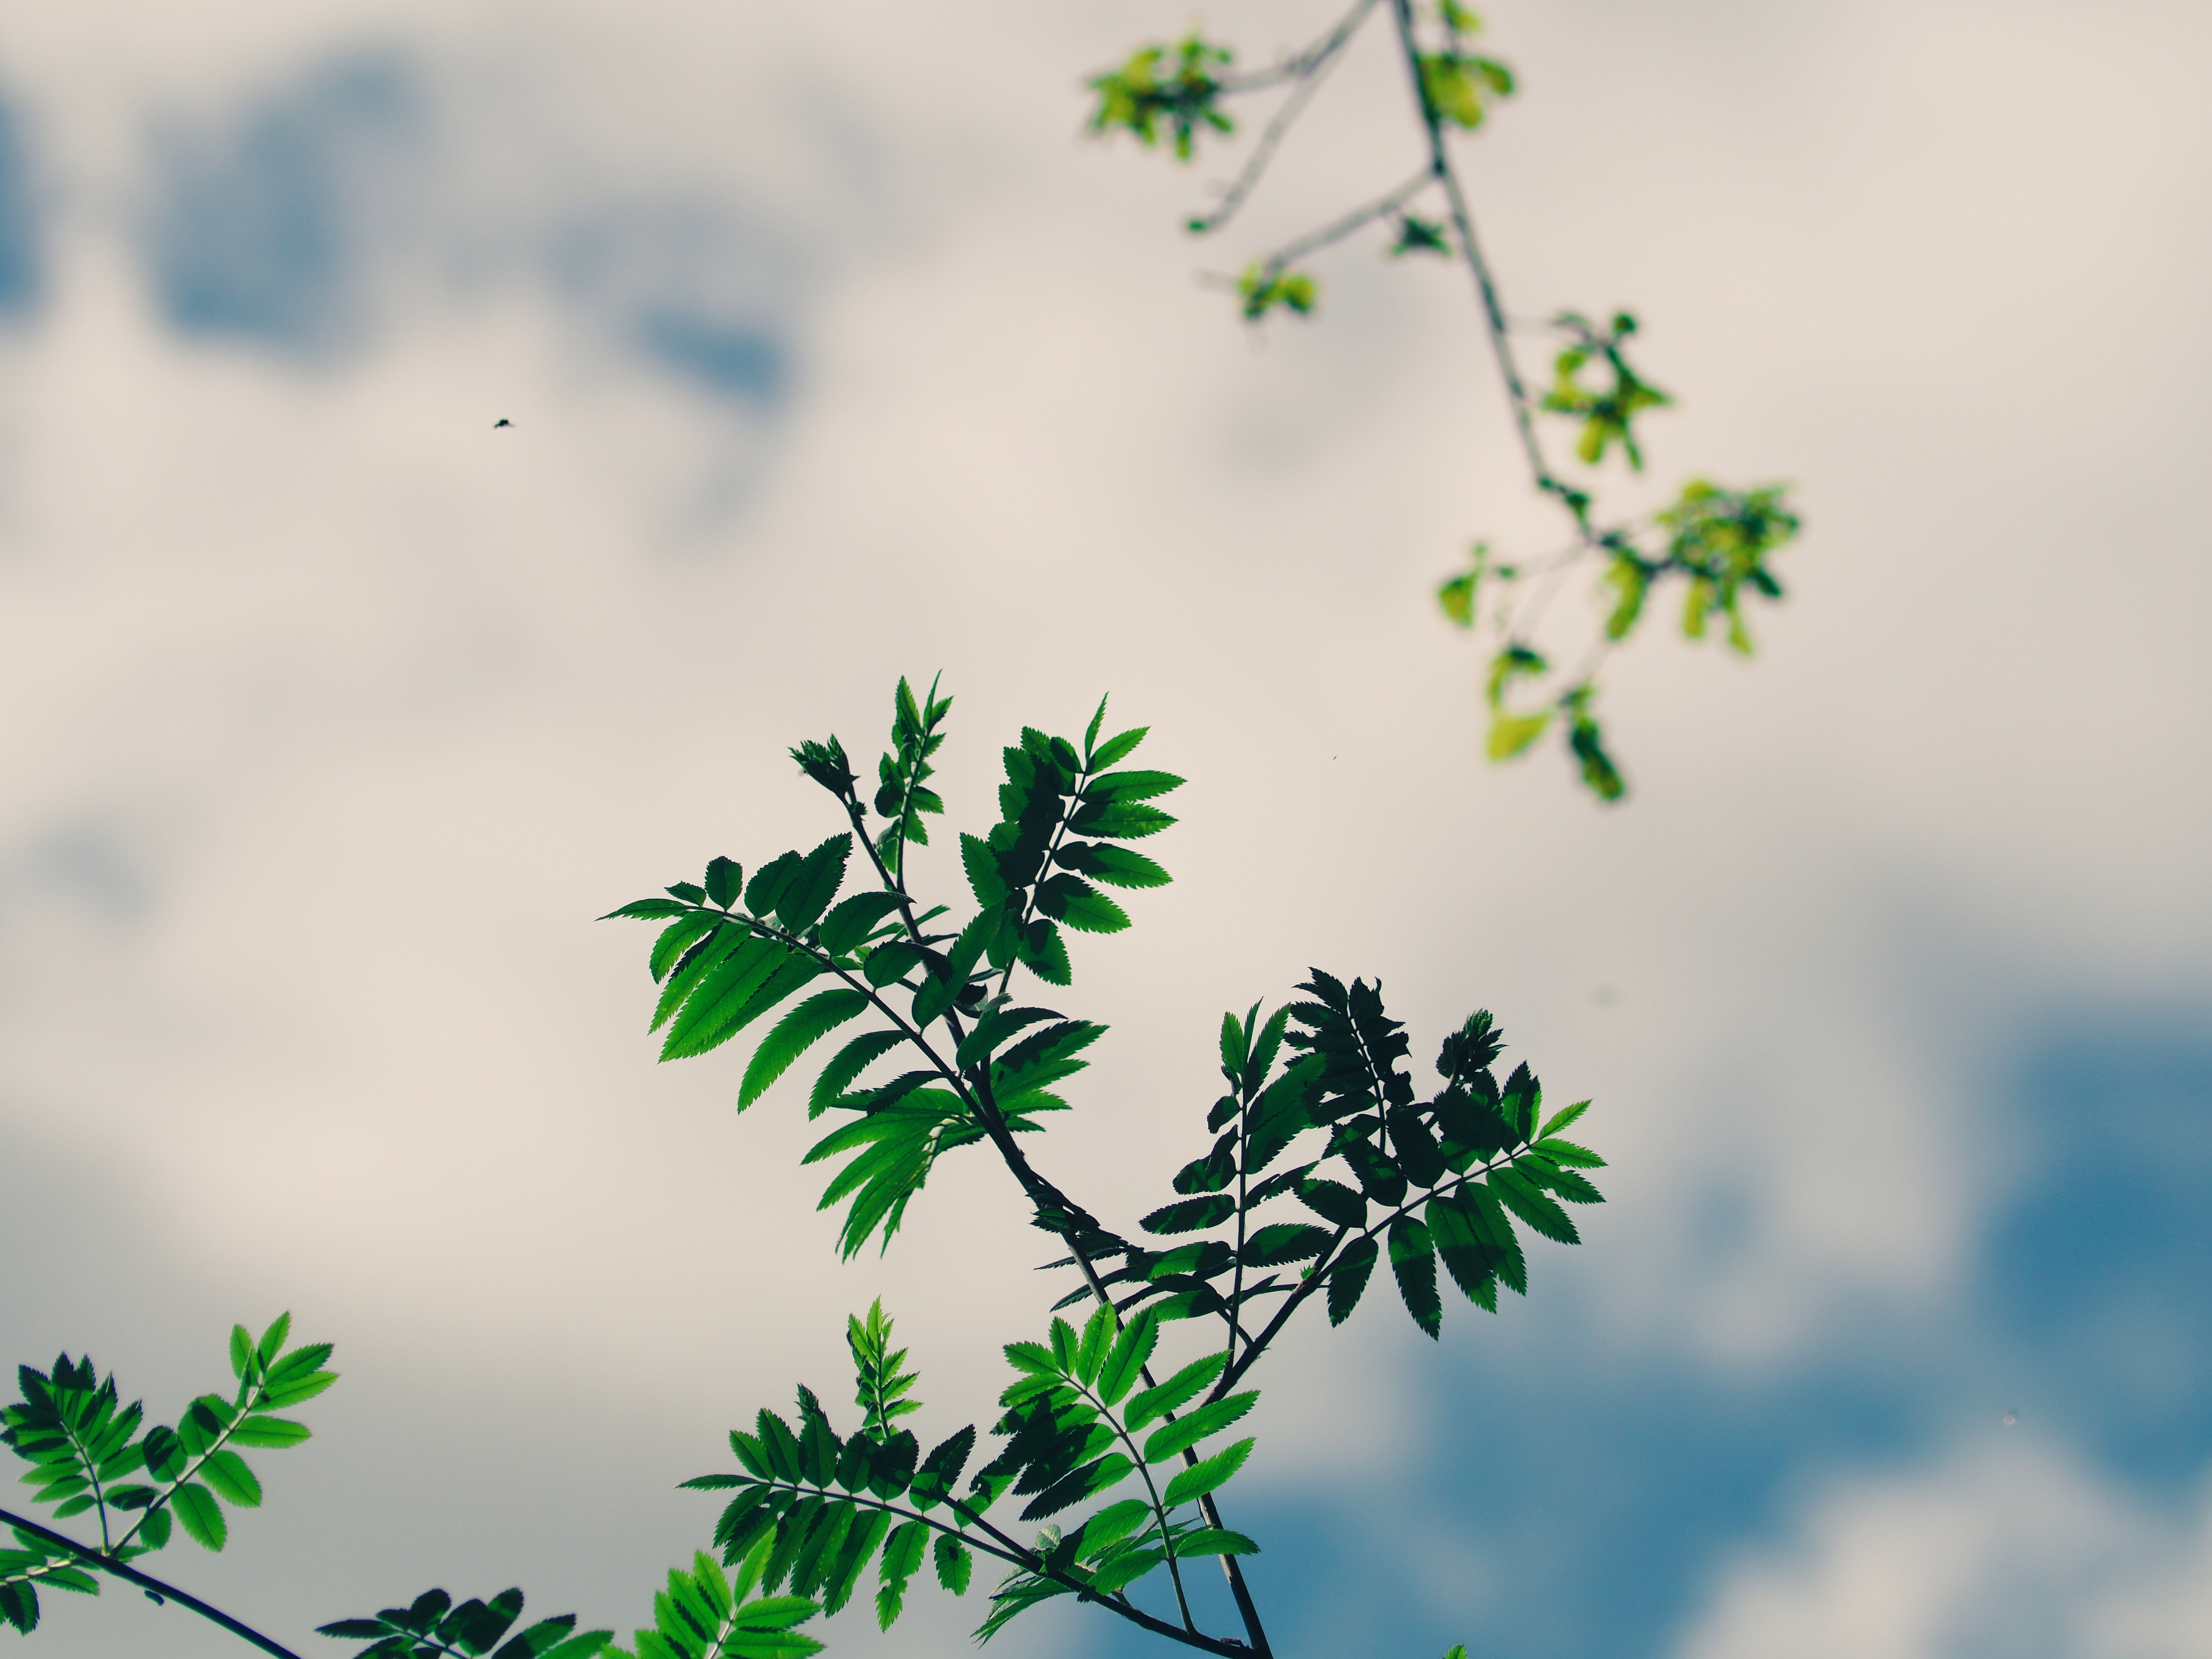 59018 free download Green wallpapers for phone, sky, nature, plant, branches Green images and screensavers for mobile